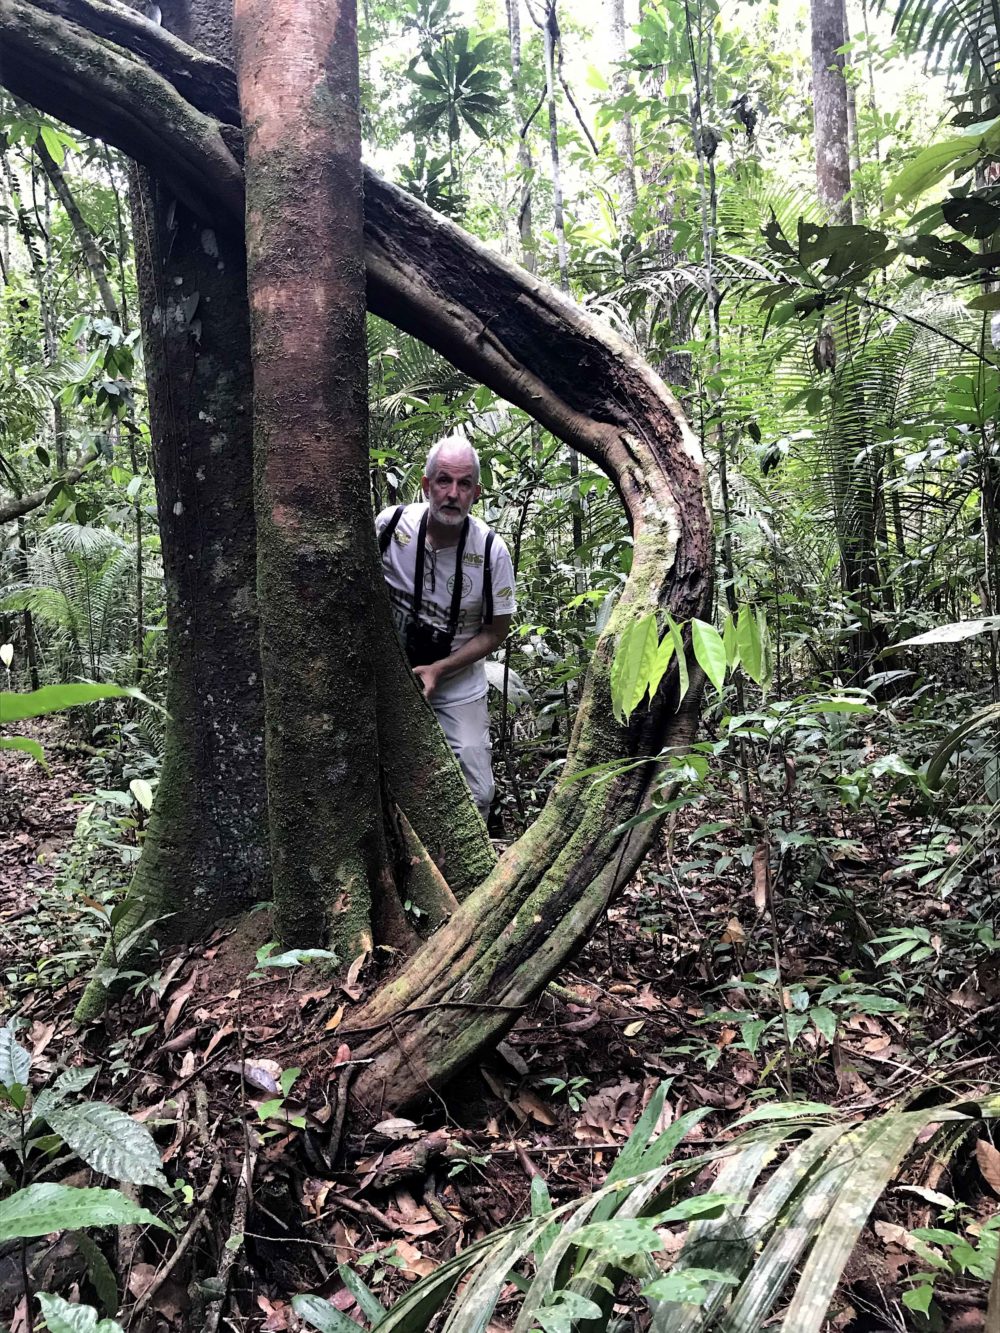 Mario Cohn-Haft, an ornithologist at Brazil's National Institute of Amazonian Research, on a field trip a few hours northeast of Manaus, the Amazon's largest city. (Courtesy of Daniel Grossman)